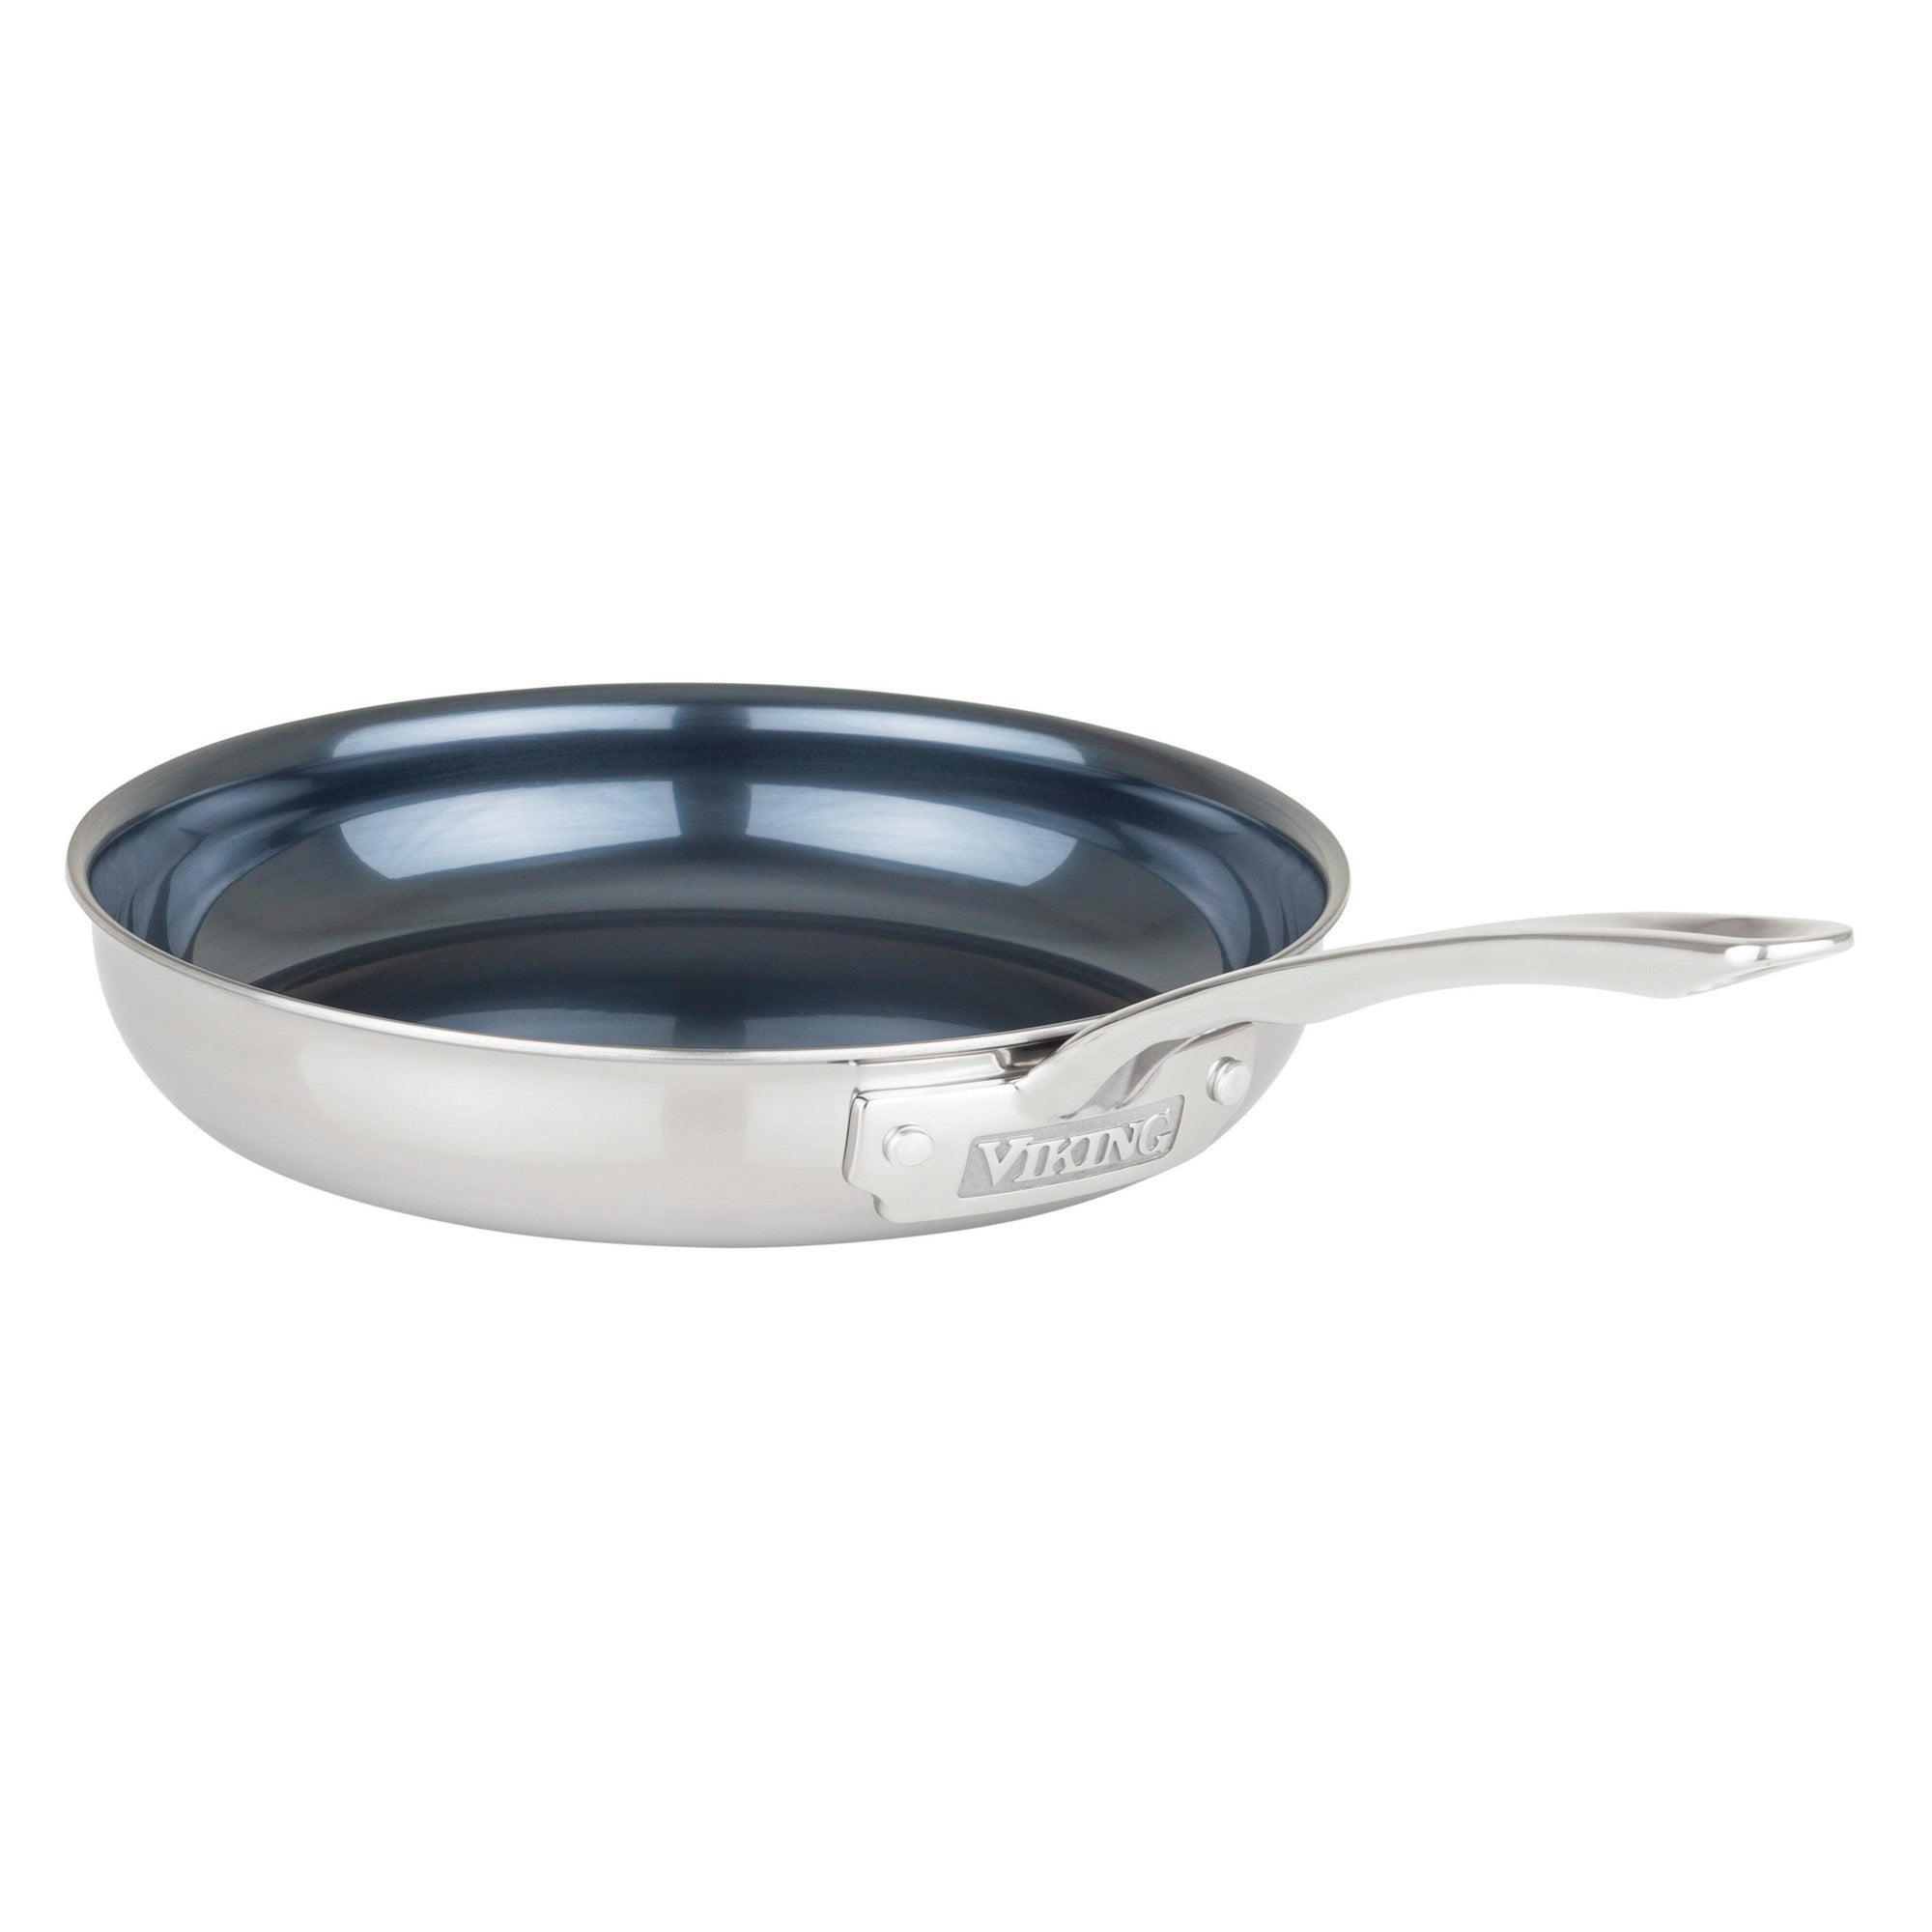 Cook N Home Nonstick Saute Fry Pan 9.5-inch Professional Hard